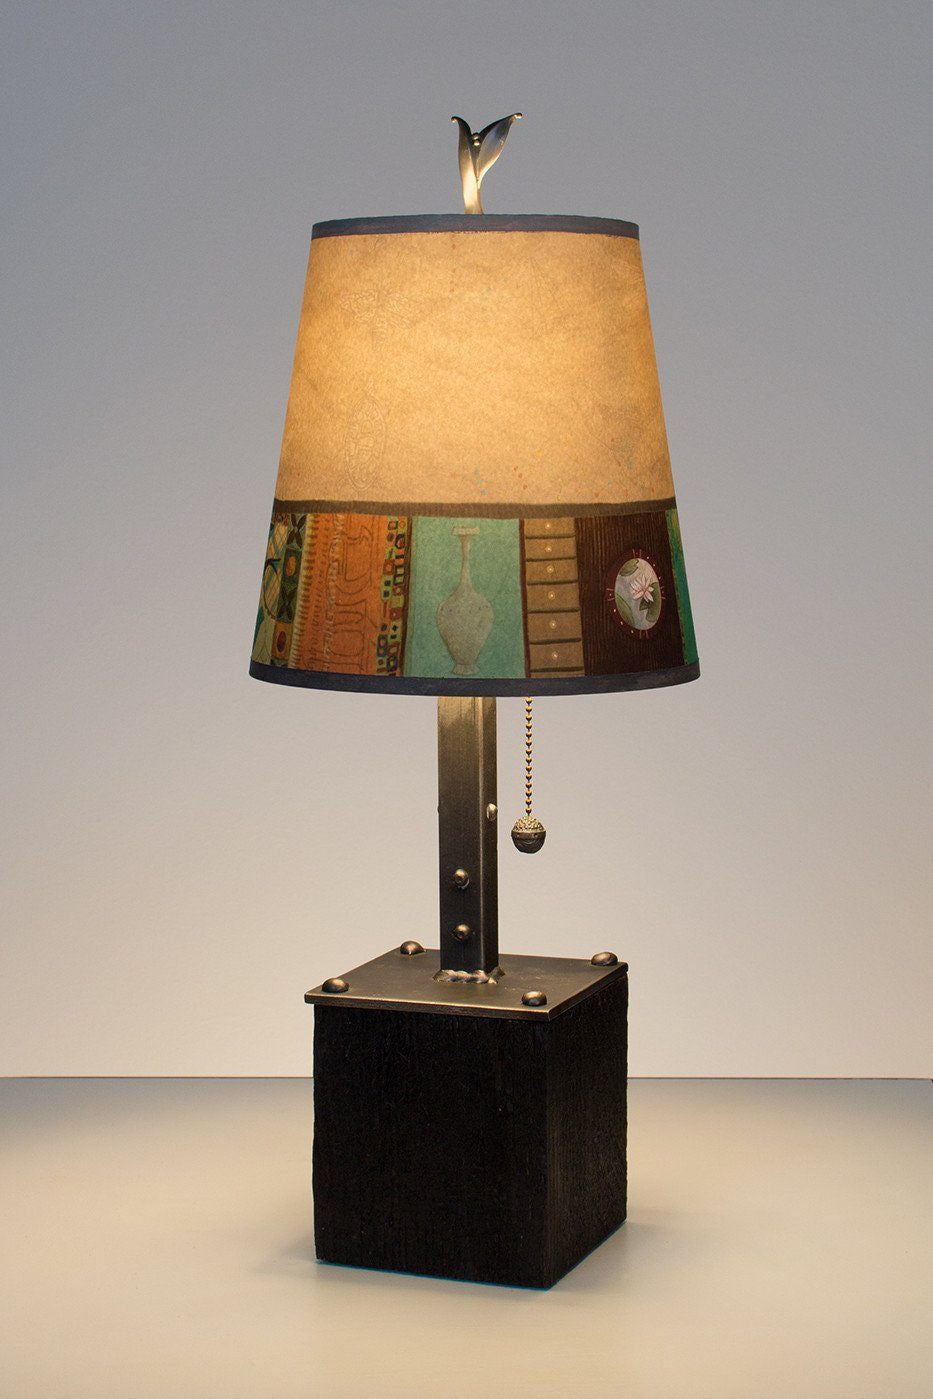 Janna Ugone & Co Table Lamps Steel Table Lamp on Reclaimed Wood with Small Drum Shade in Linen Match